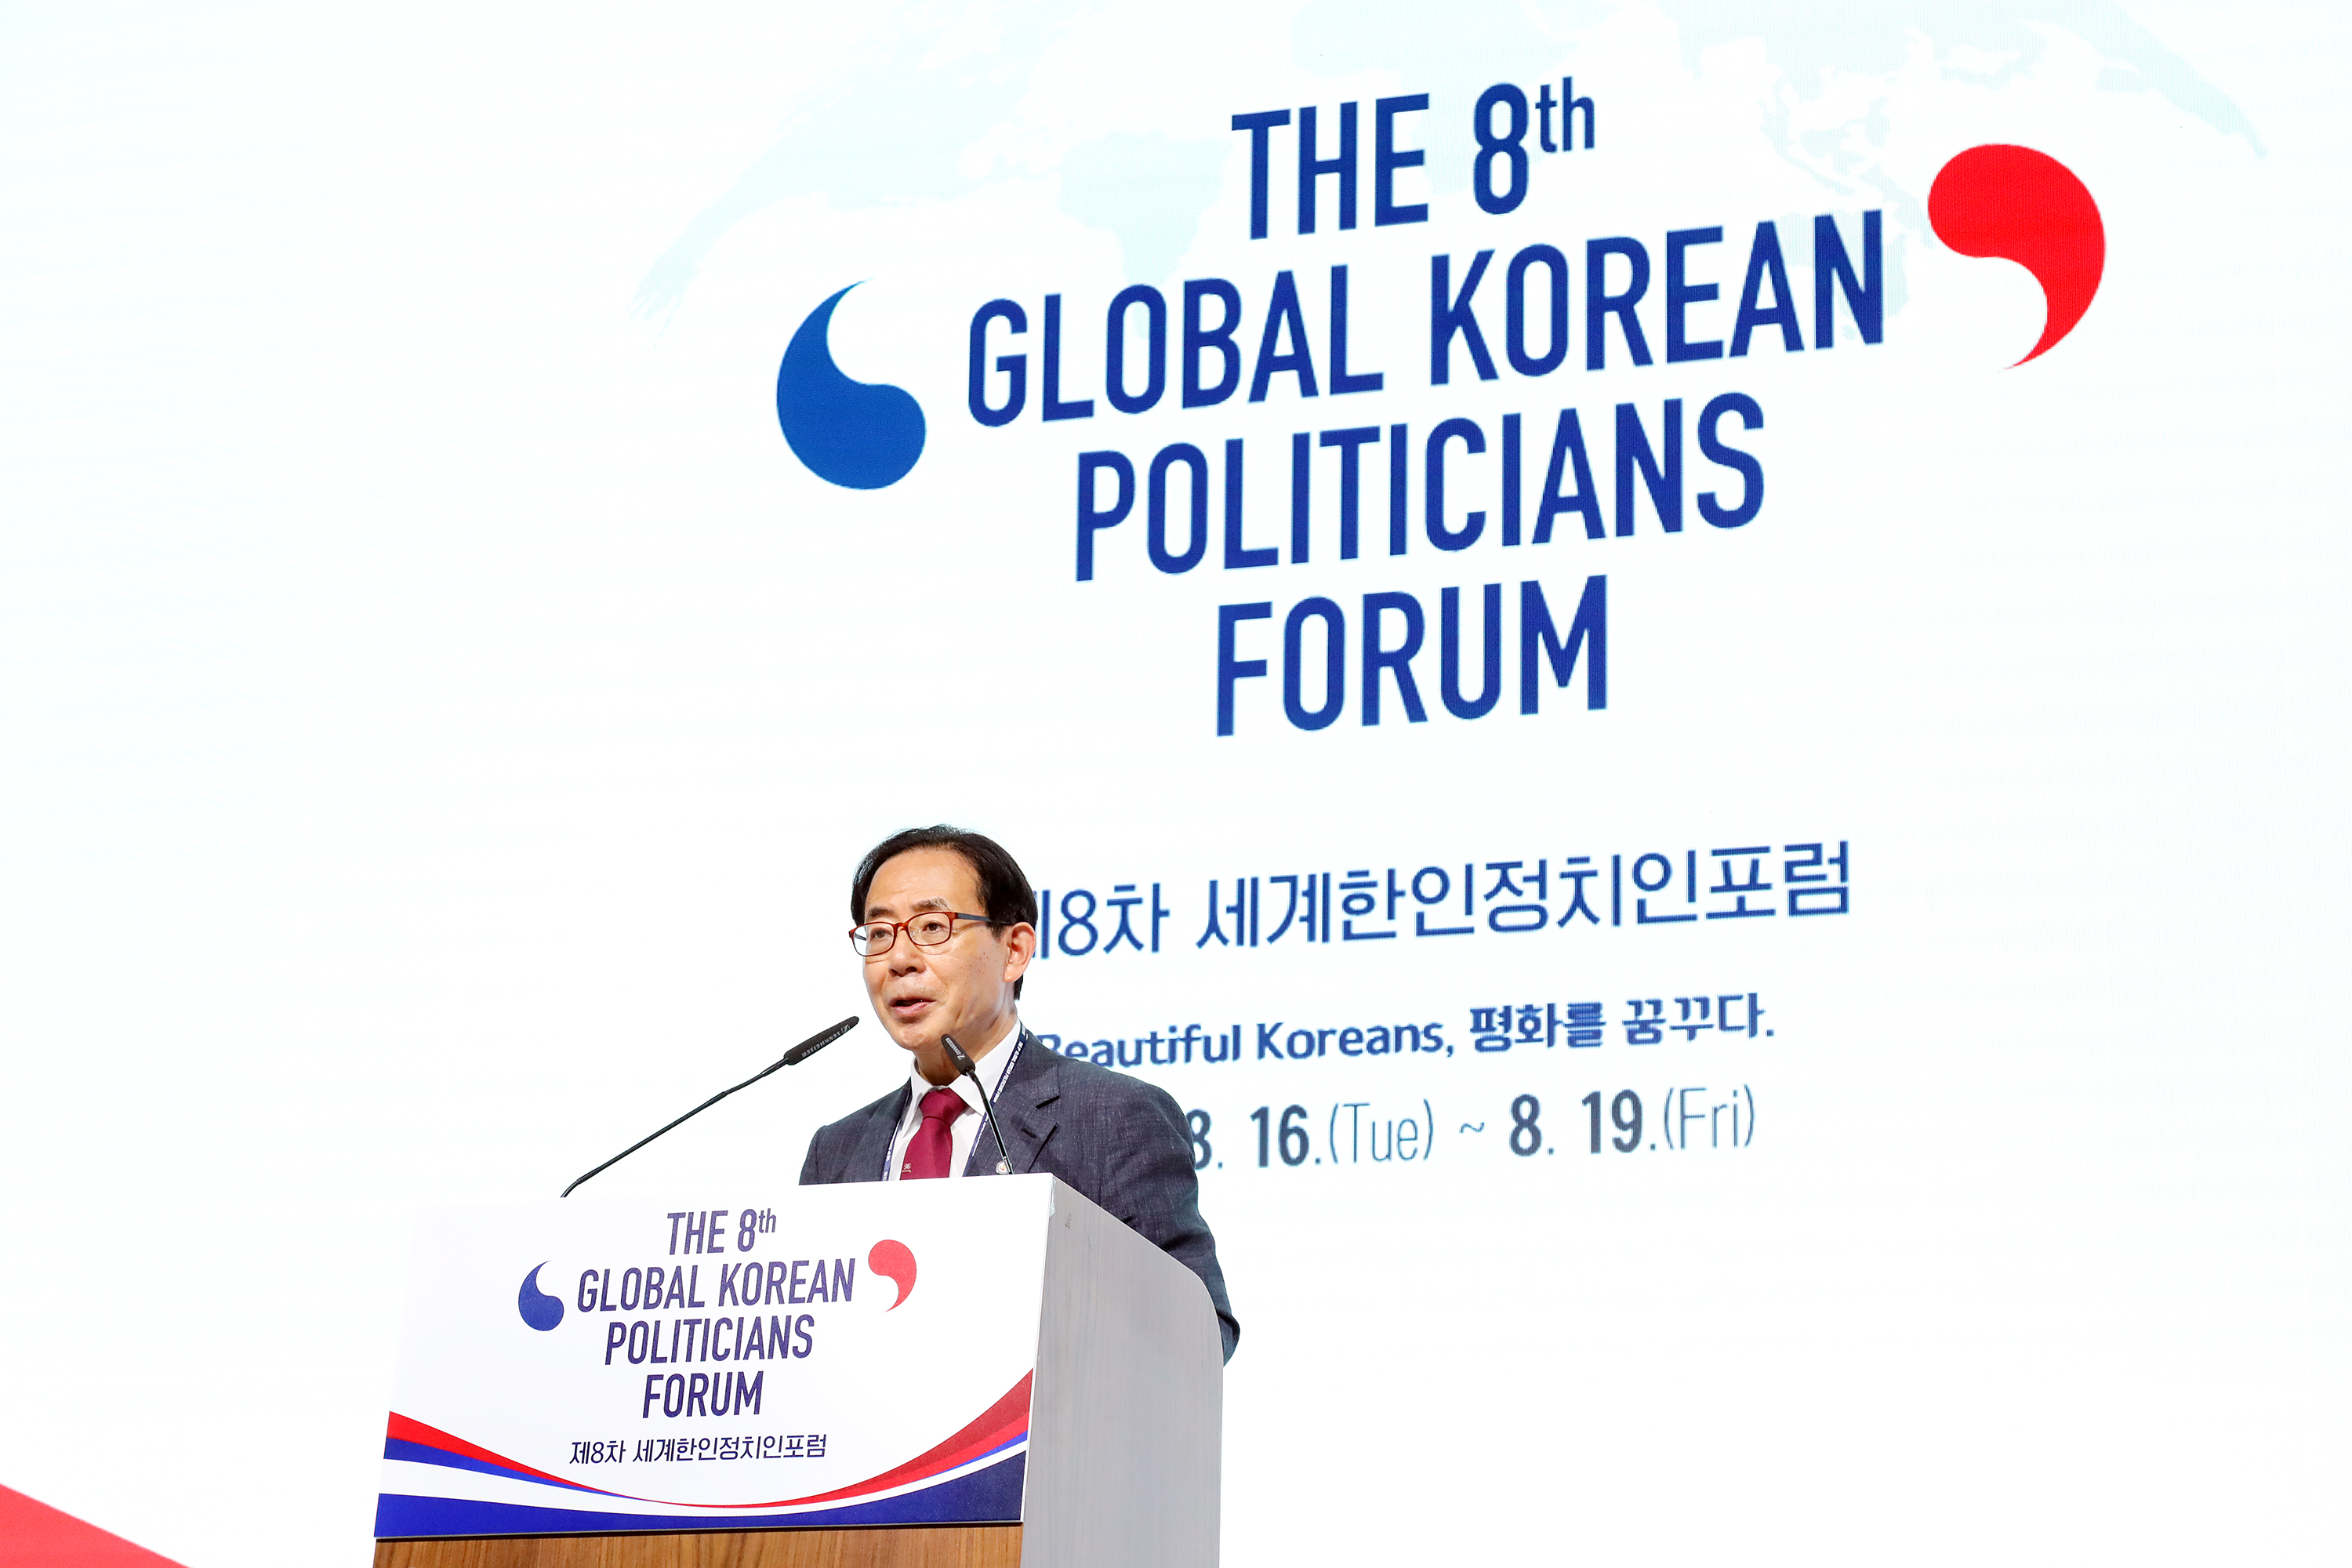 Chairman Seong-gon Kim delivered a special address on the topic of “Beautiful Koreans, Beautiful Politicians” on the first day of the forum.